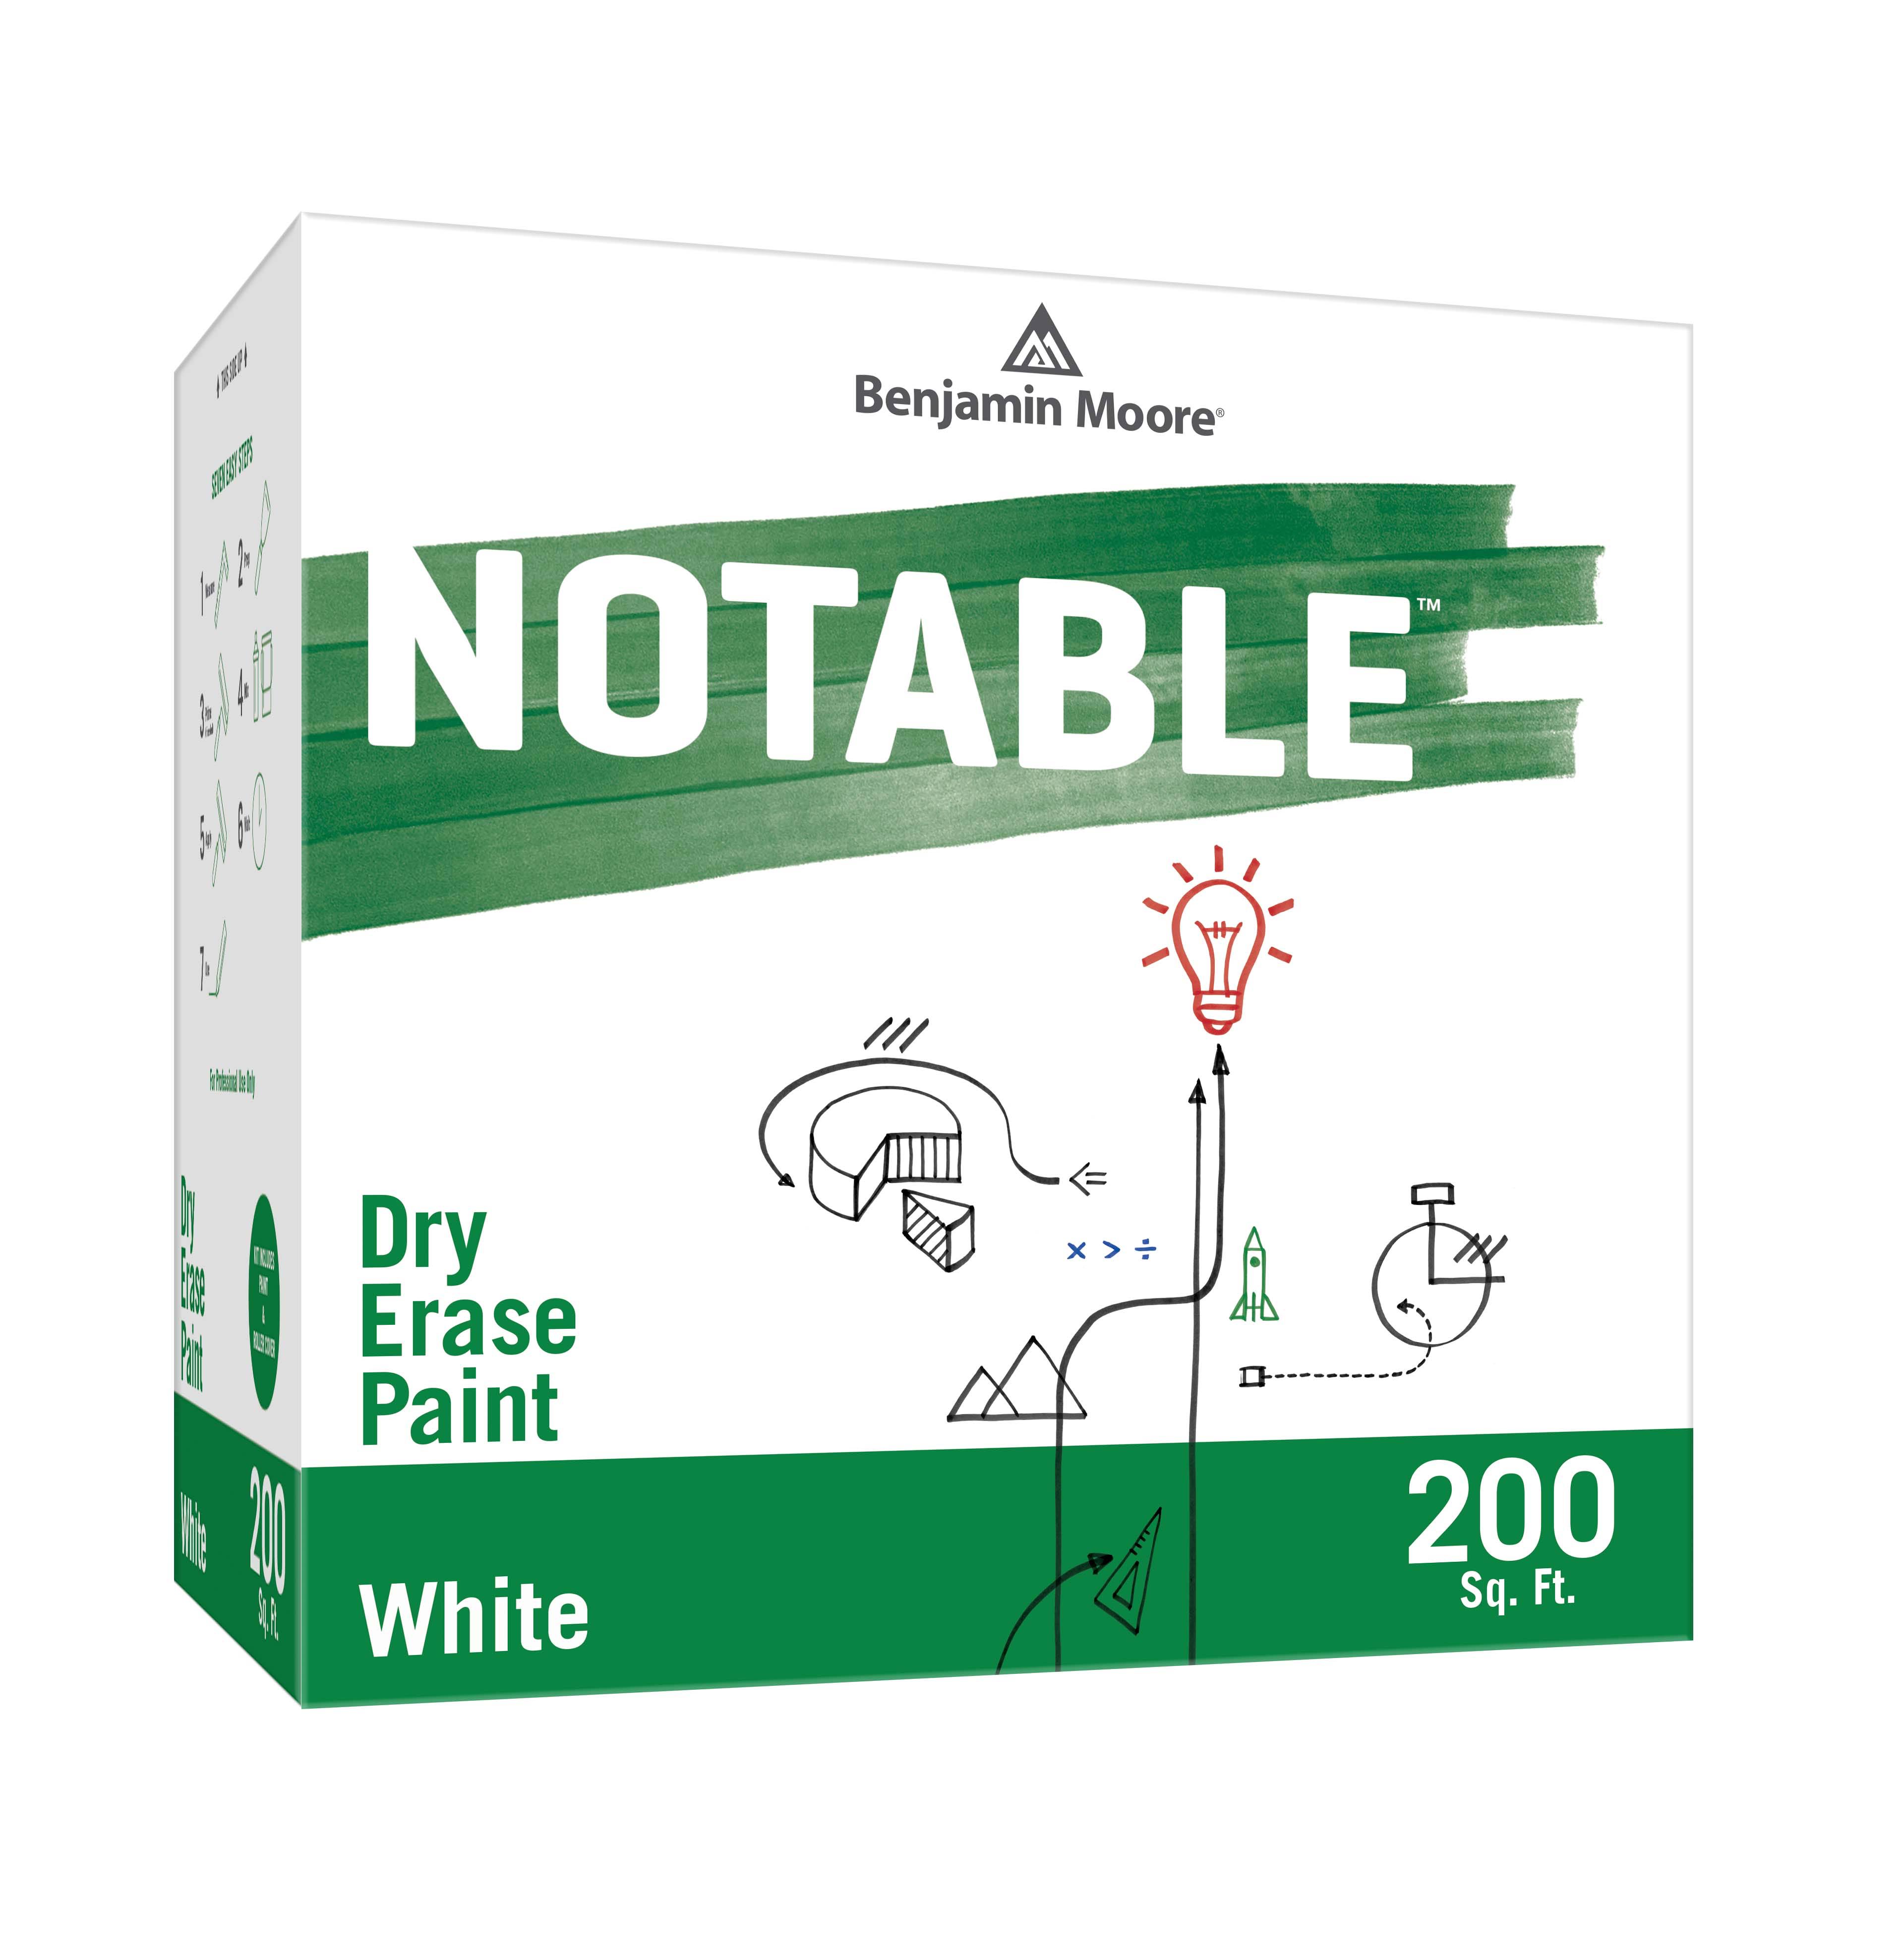 Benjamin Moore Notable Dry Erase Paint - White - 200 Sq ft